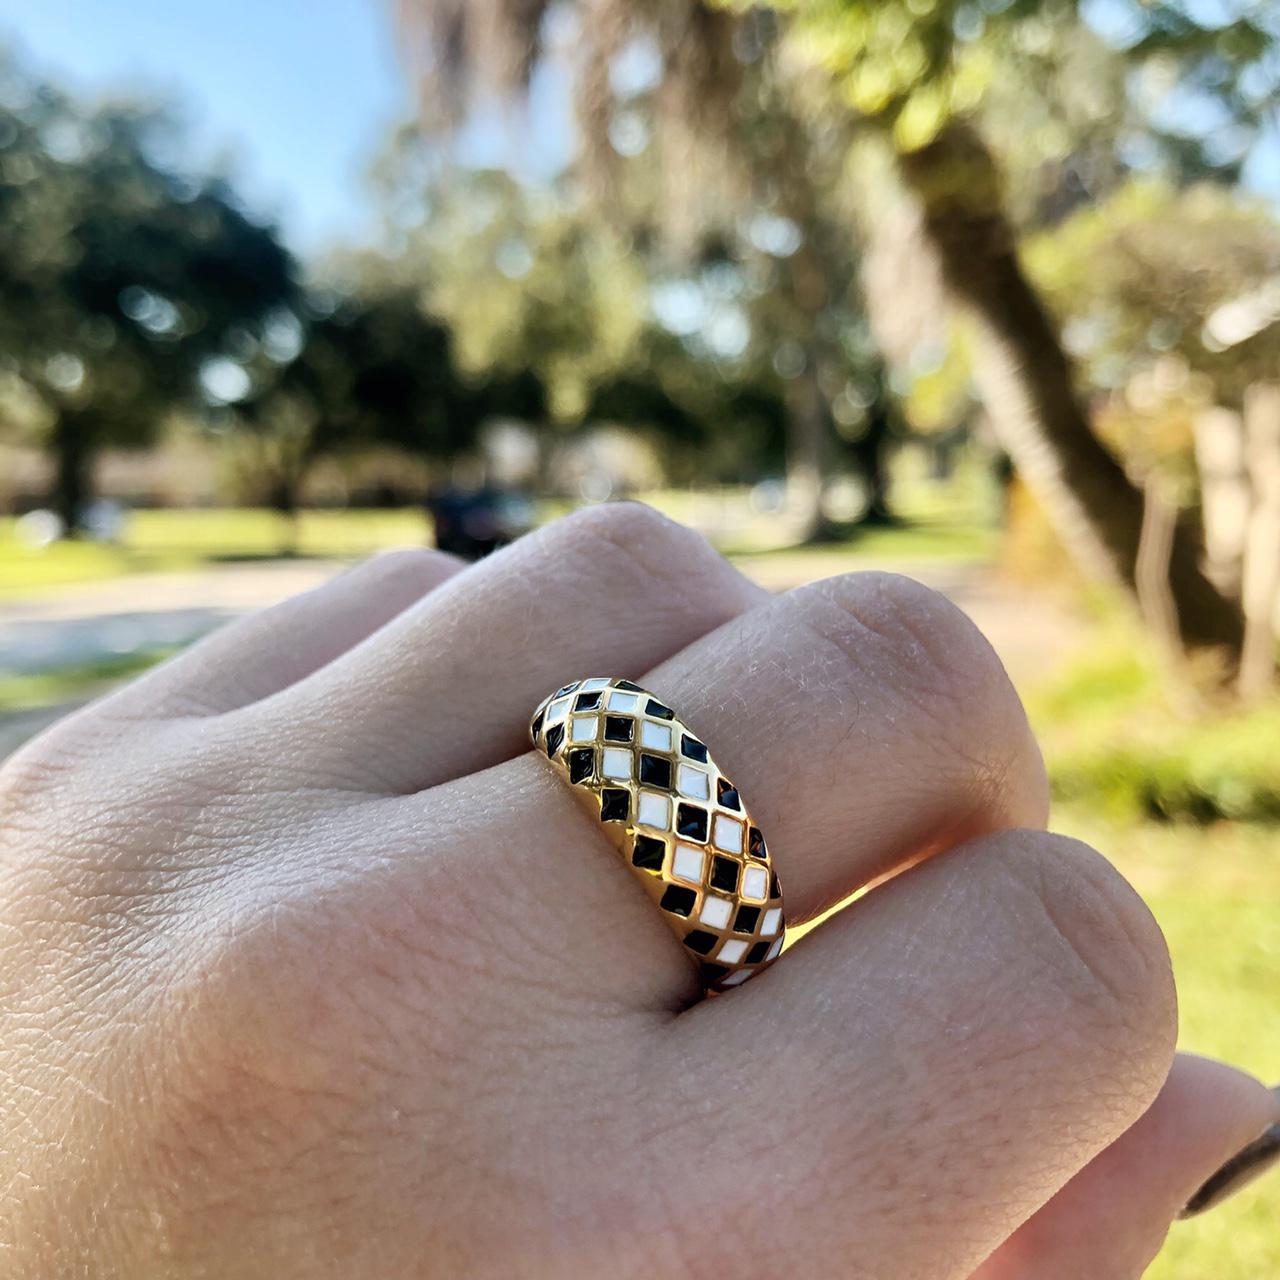 Product Image 2 - New! “Demi” Checker Gold Ring

Stainless